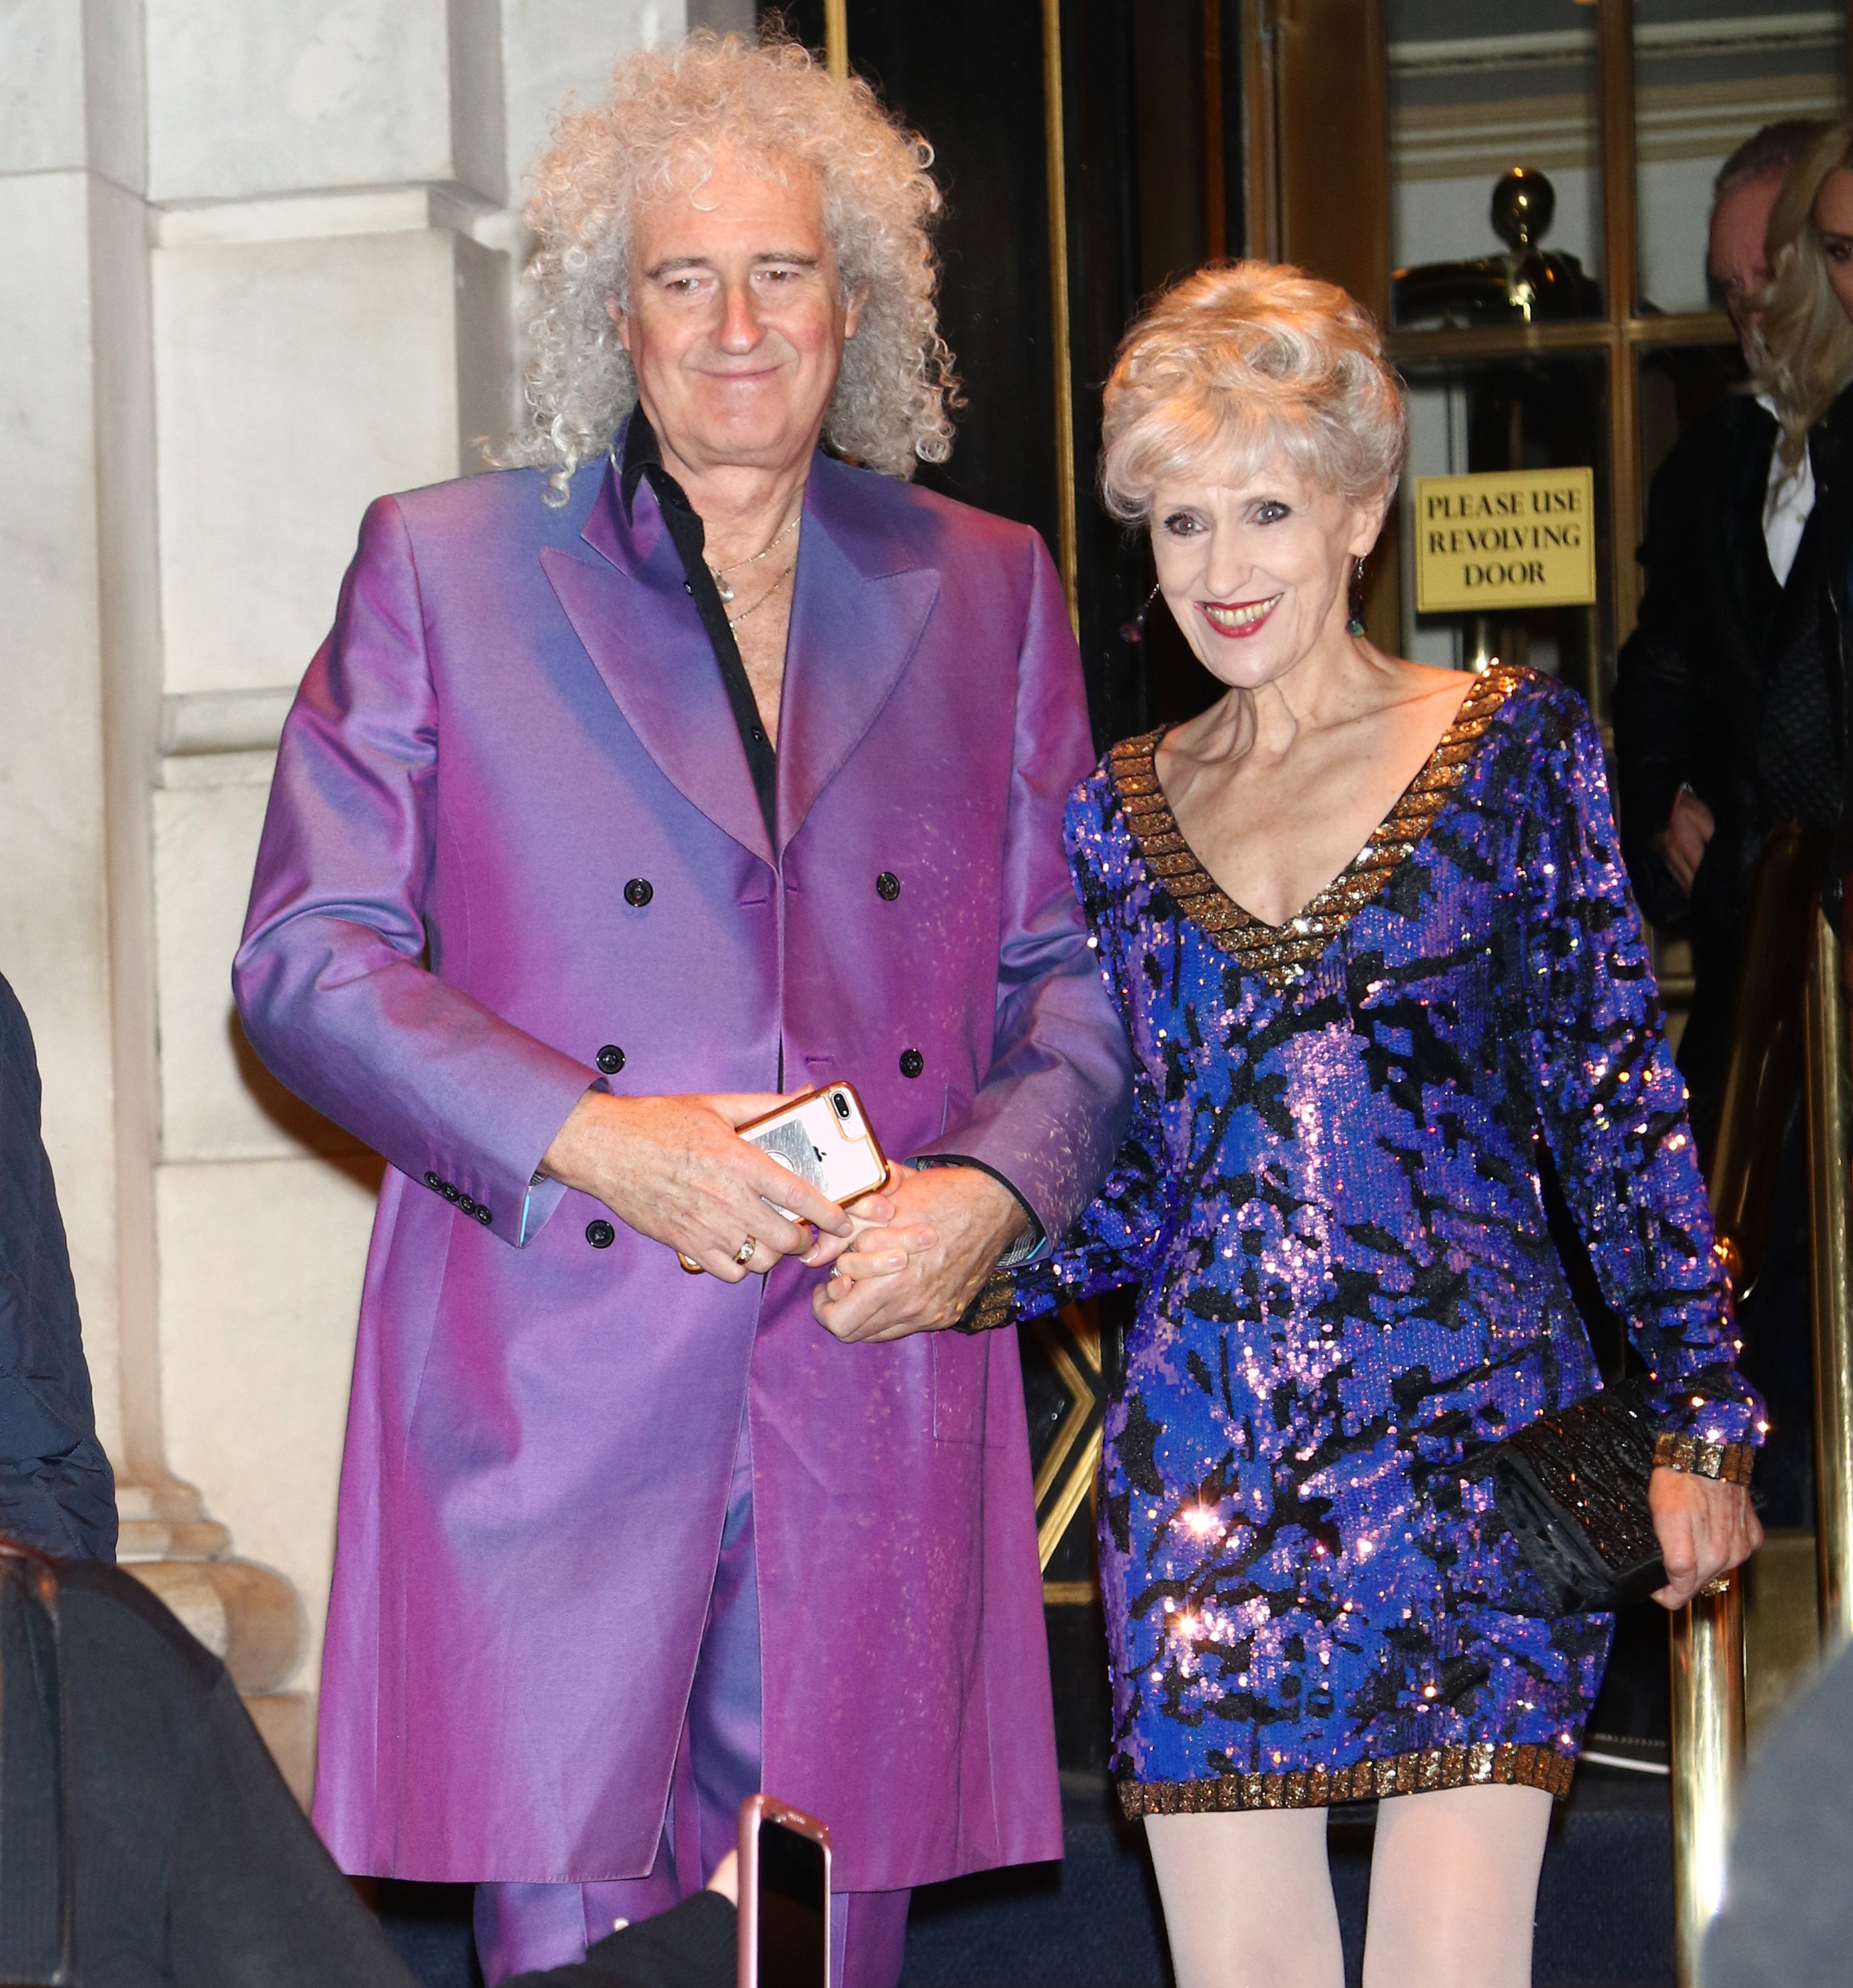 Brian May with wife Anita Dobson arriving at the premiere of "Bohemian Rhapsody" on October 30, 2018 | Source: Getty Images